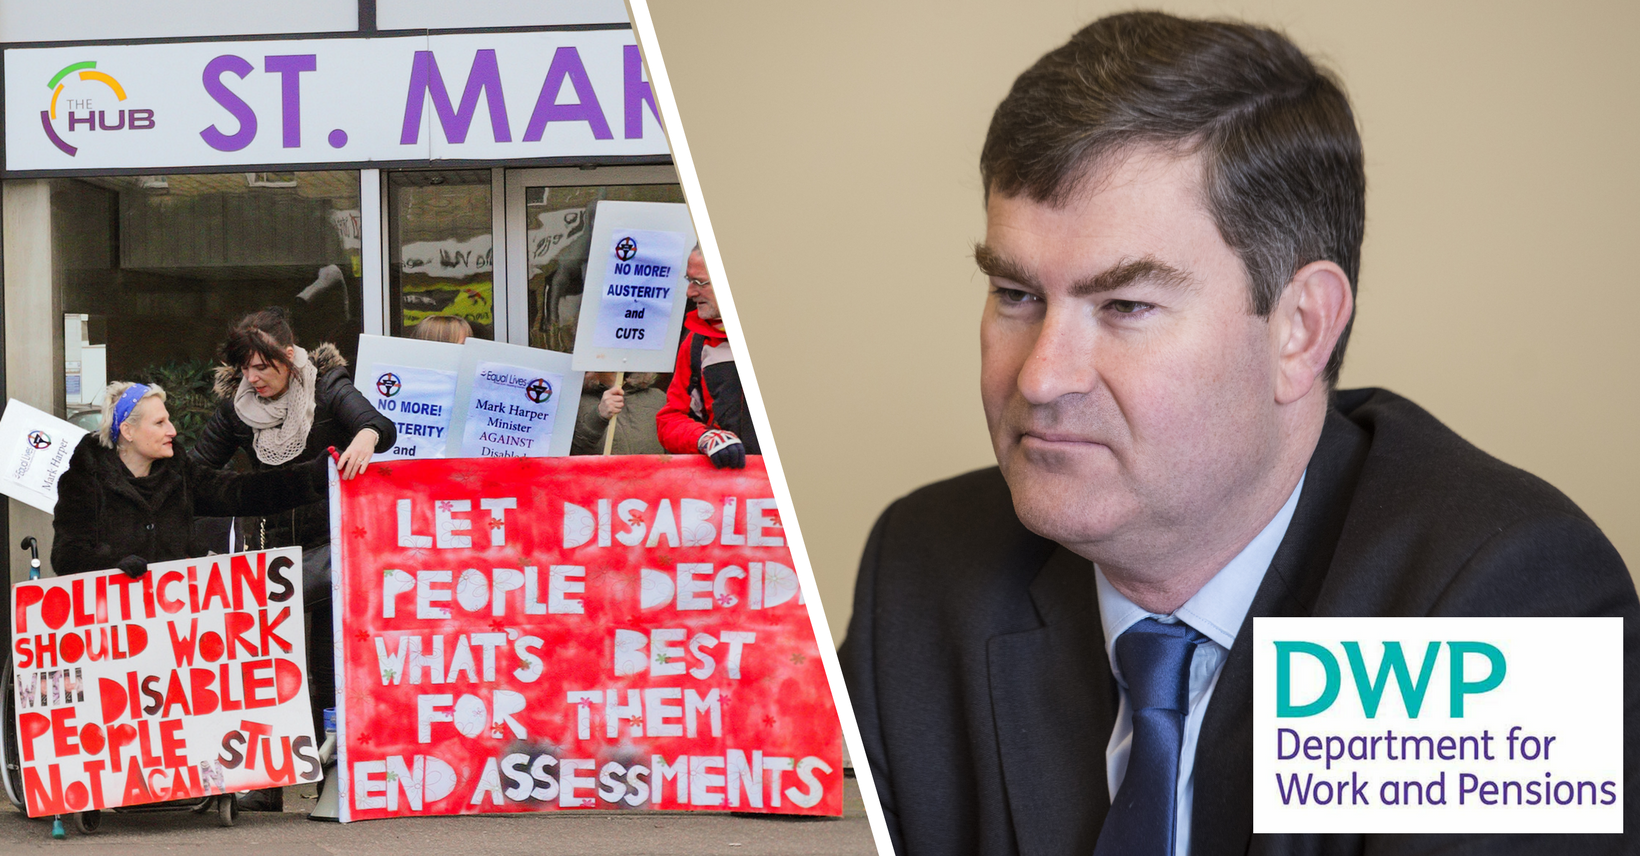 Campaigners just forced the Tories to scrap a target for kicking disabled people off benefits